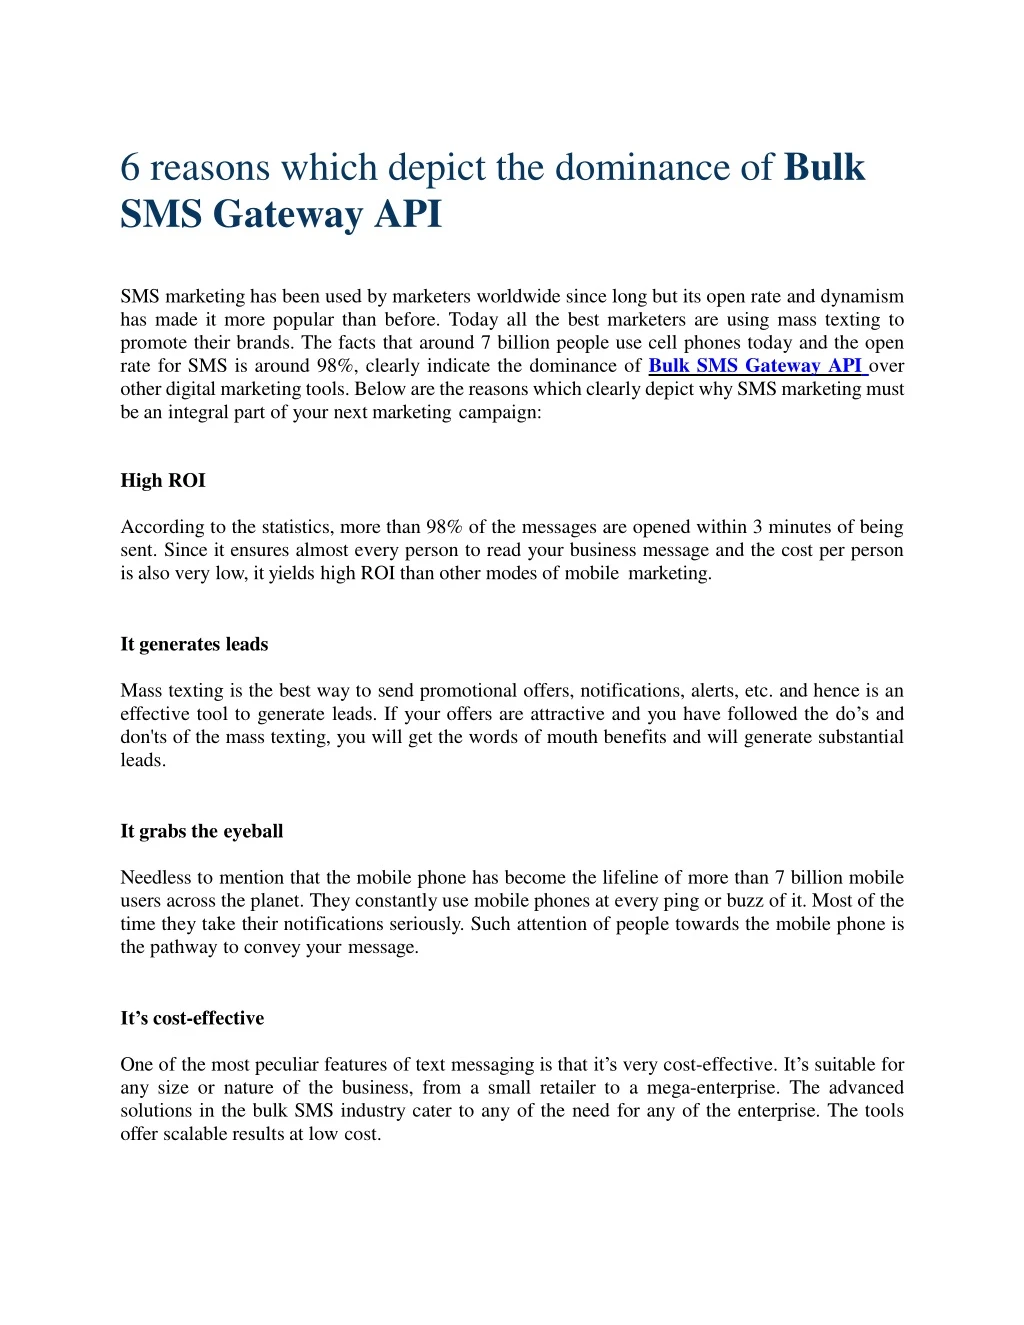 6 reasons which depict the dominance of bulk sms gateway api